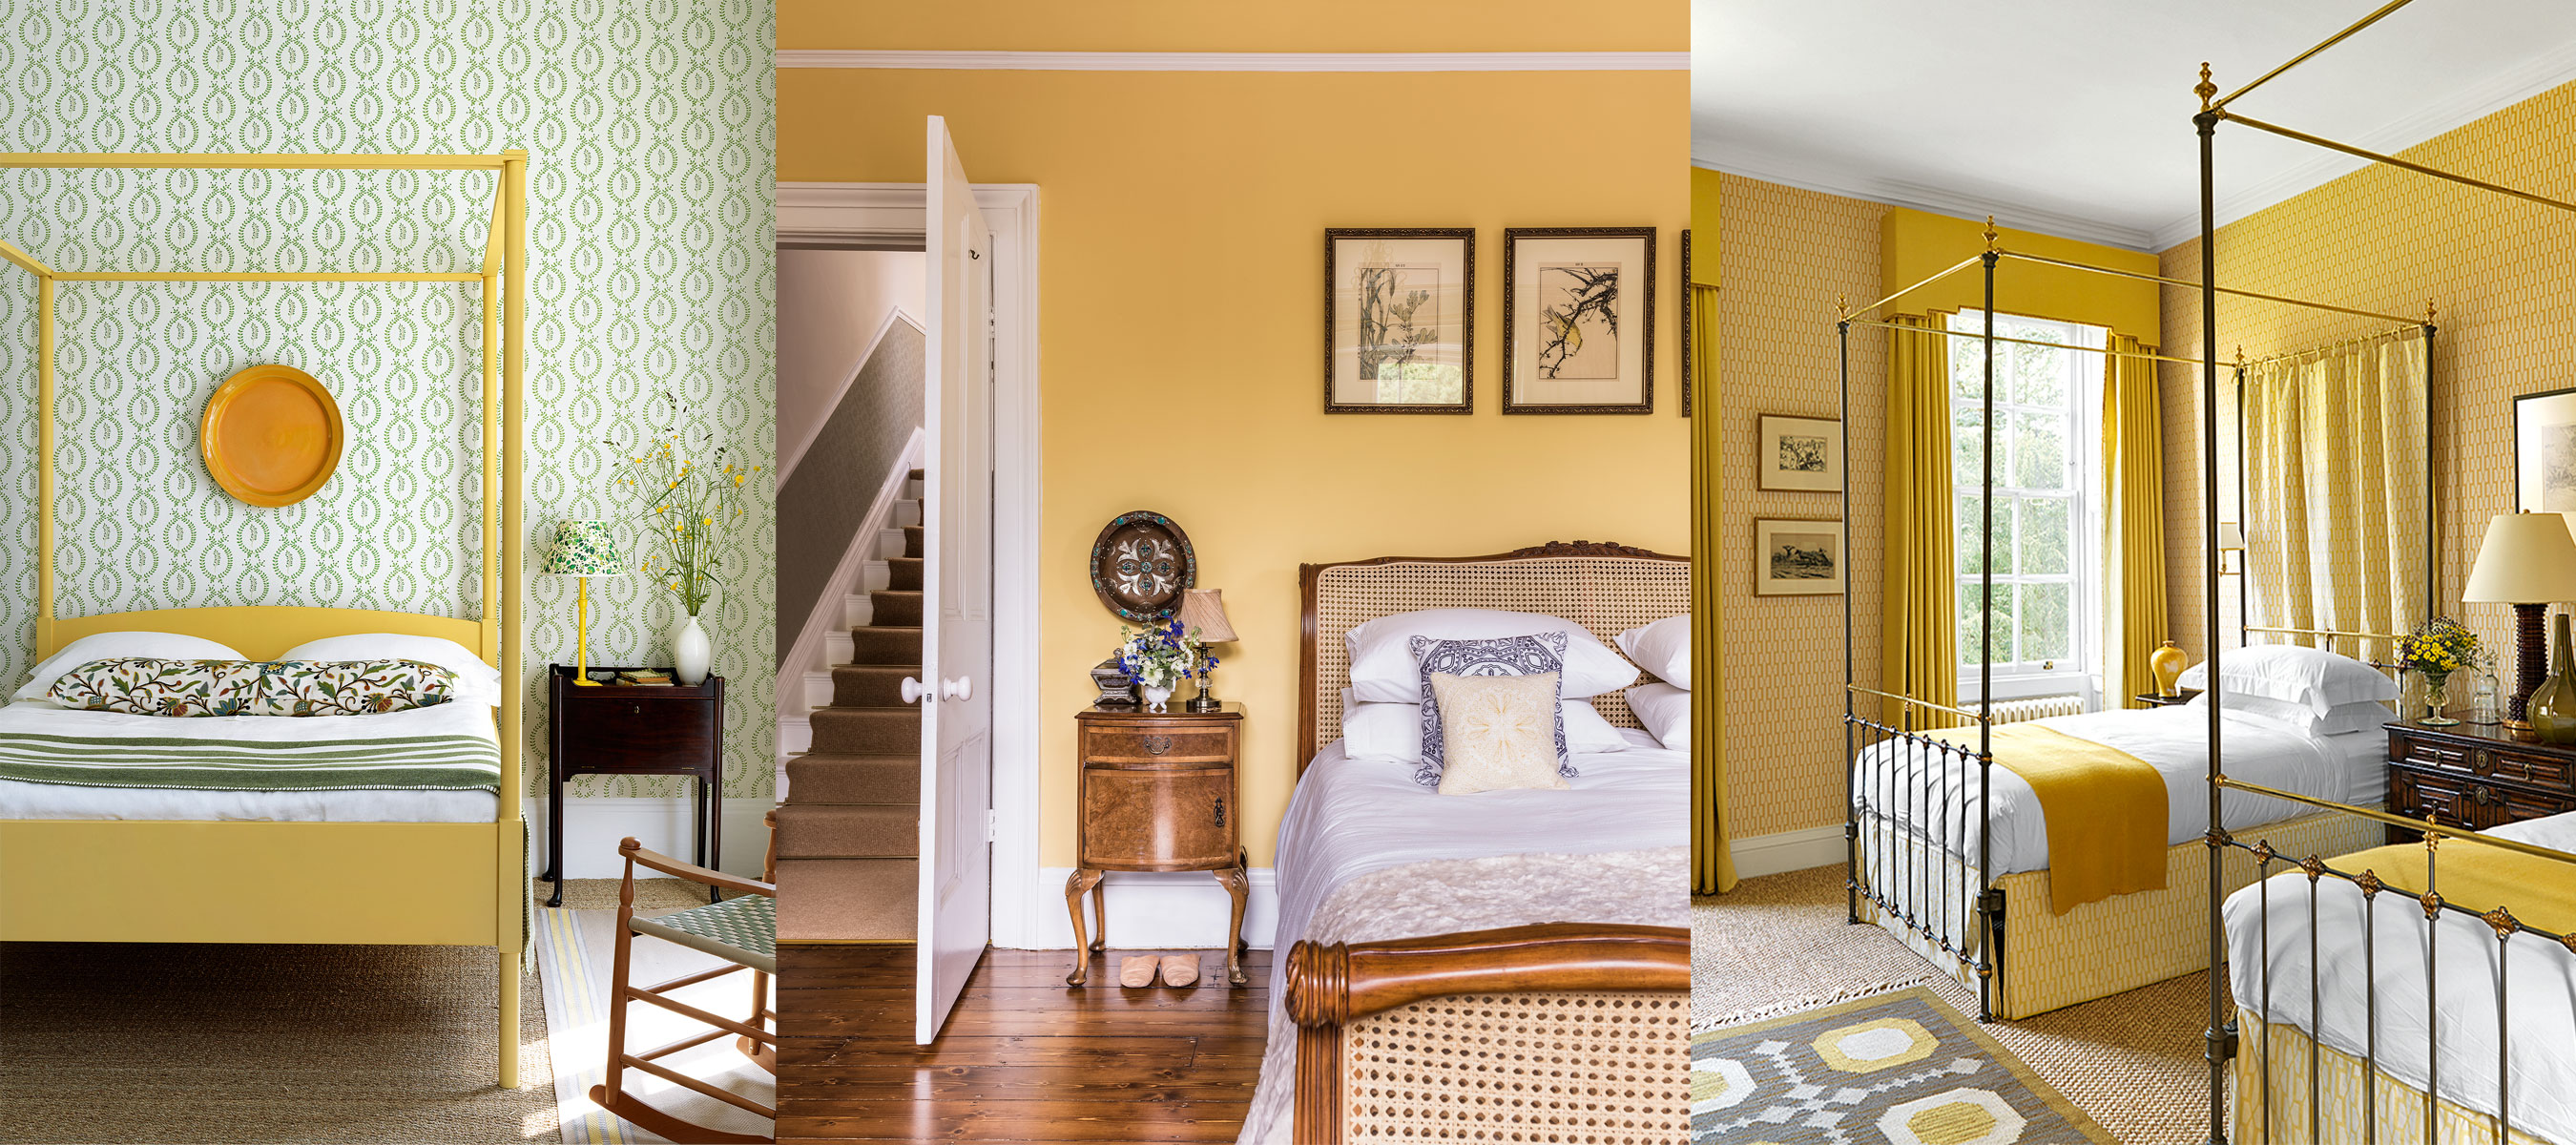 Yellow bedroom ideas: 10 sunny schemes to brighten a room |